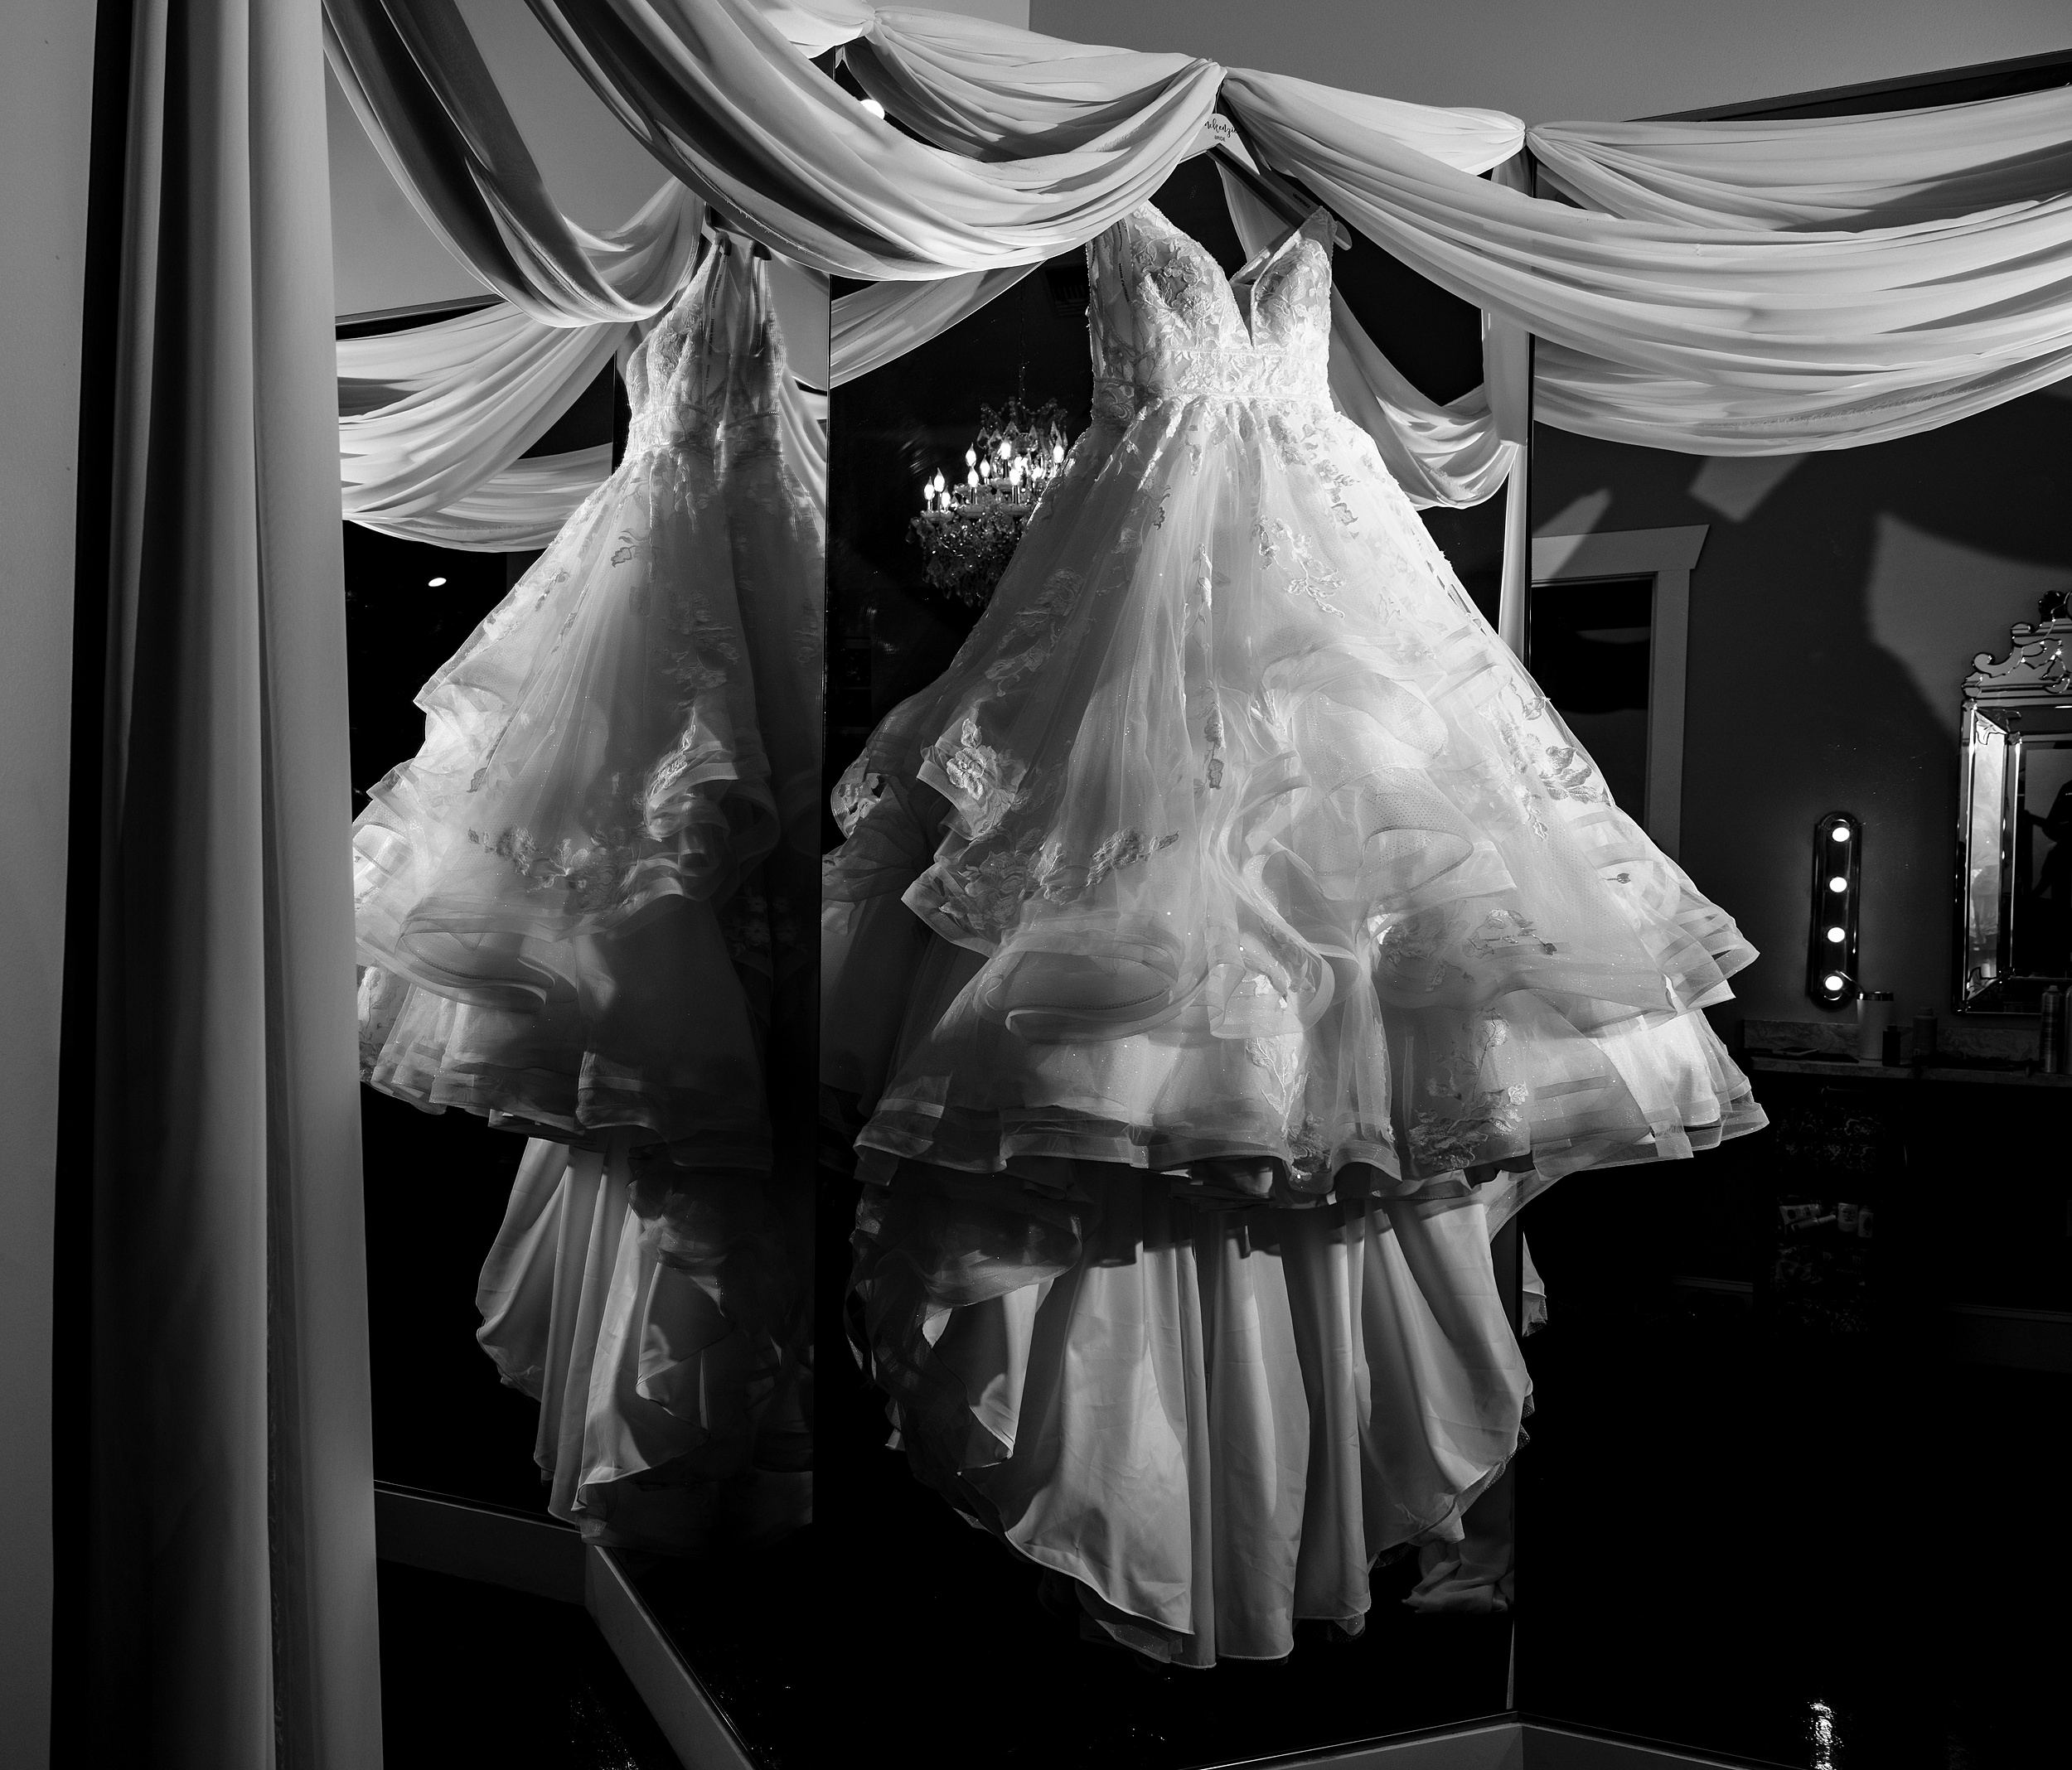 A lace wedding dress hangs on mirrors in the bowing oaks wedding venue getting ready room